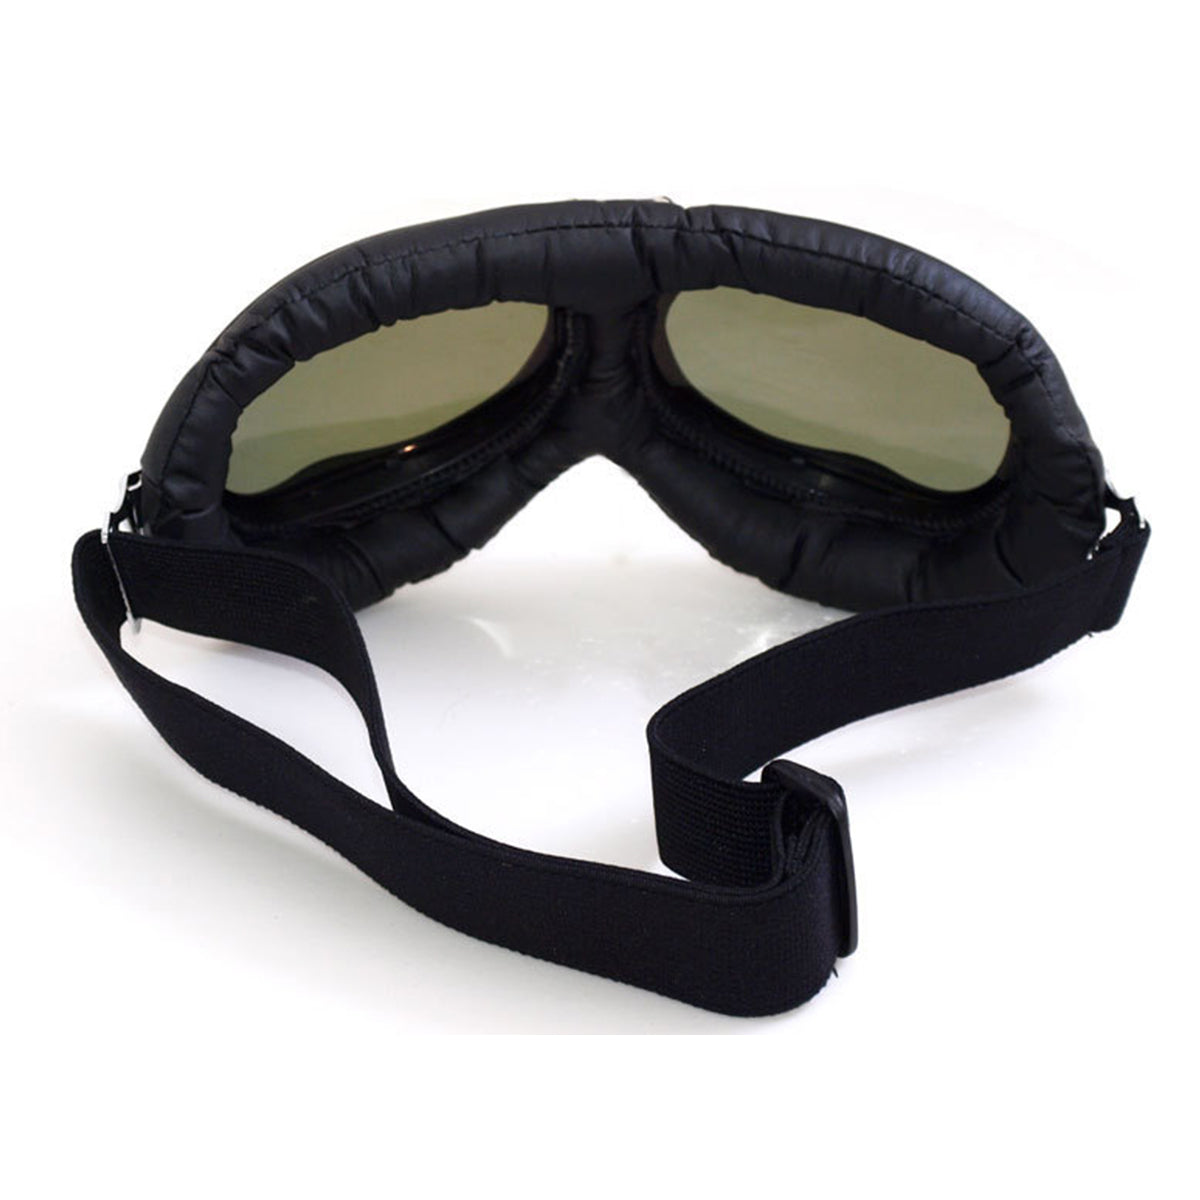 Black Retro Helmet Goggles Motrocycle Scooter Cycling Riding Eyewear Glasses Adult